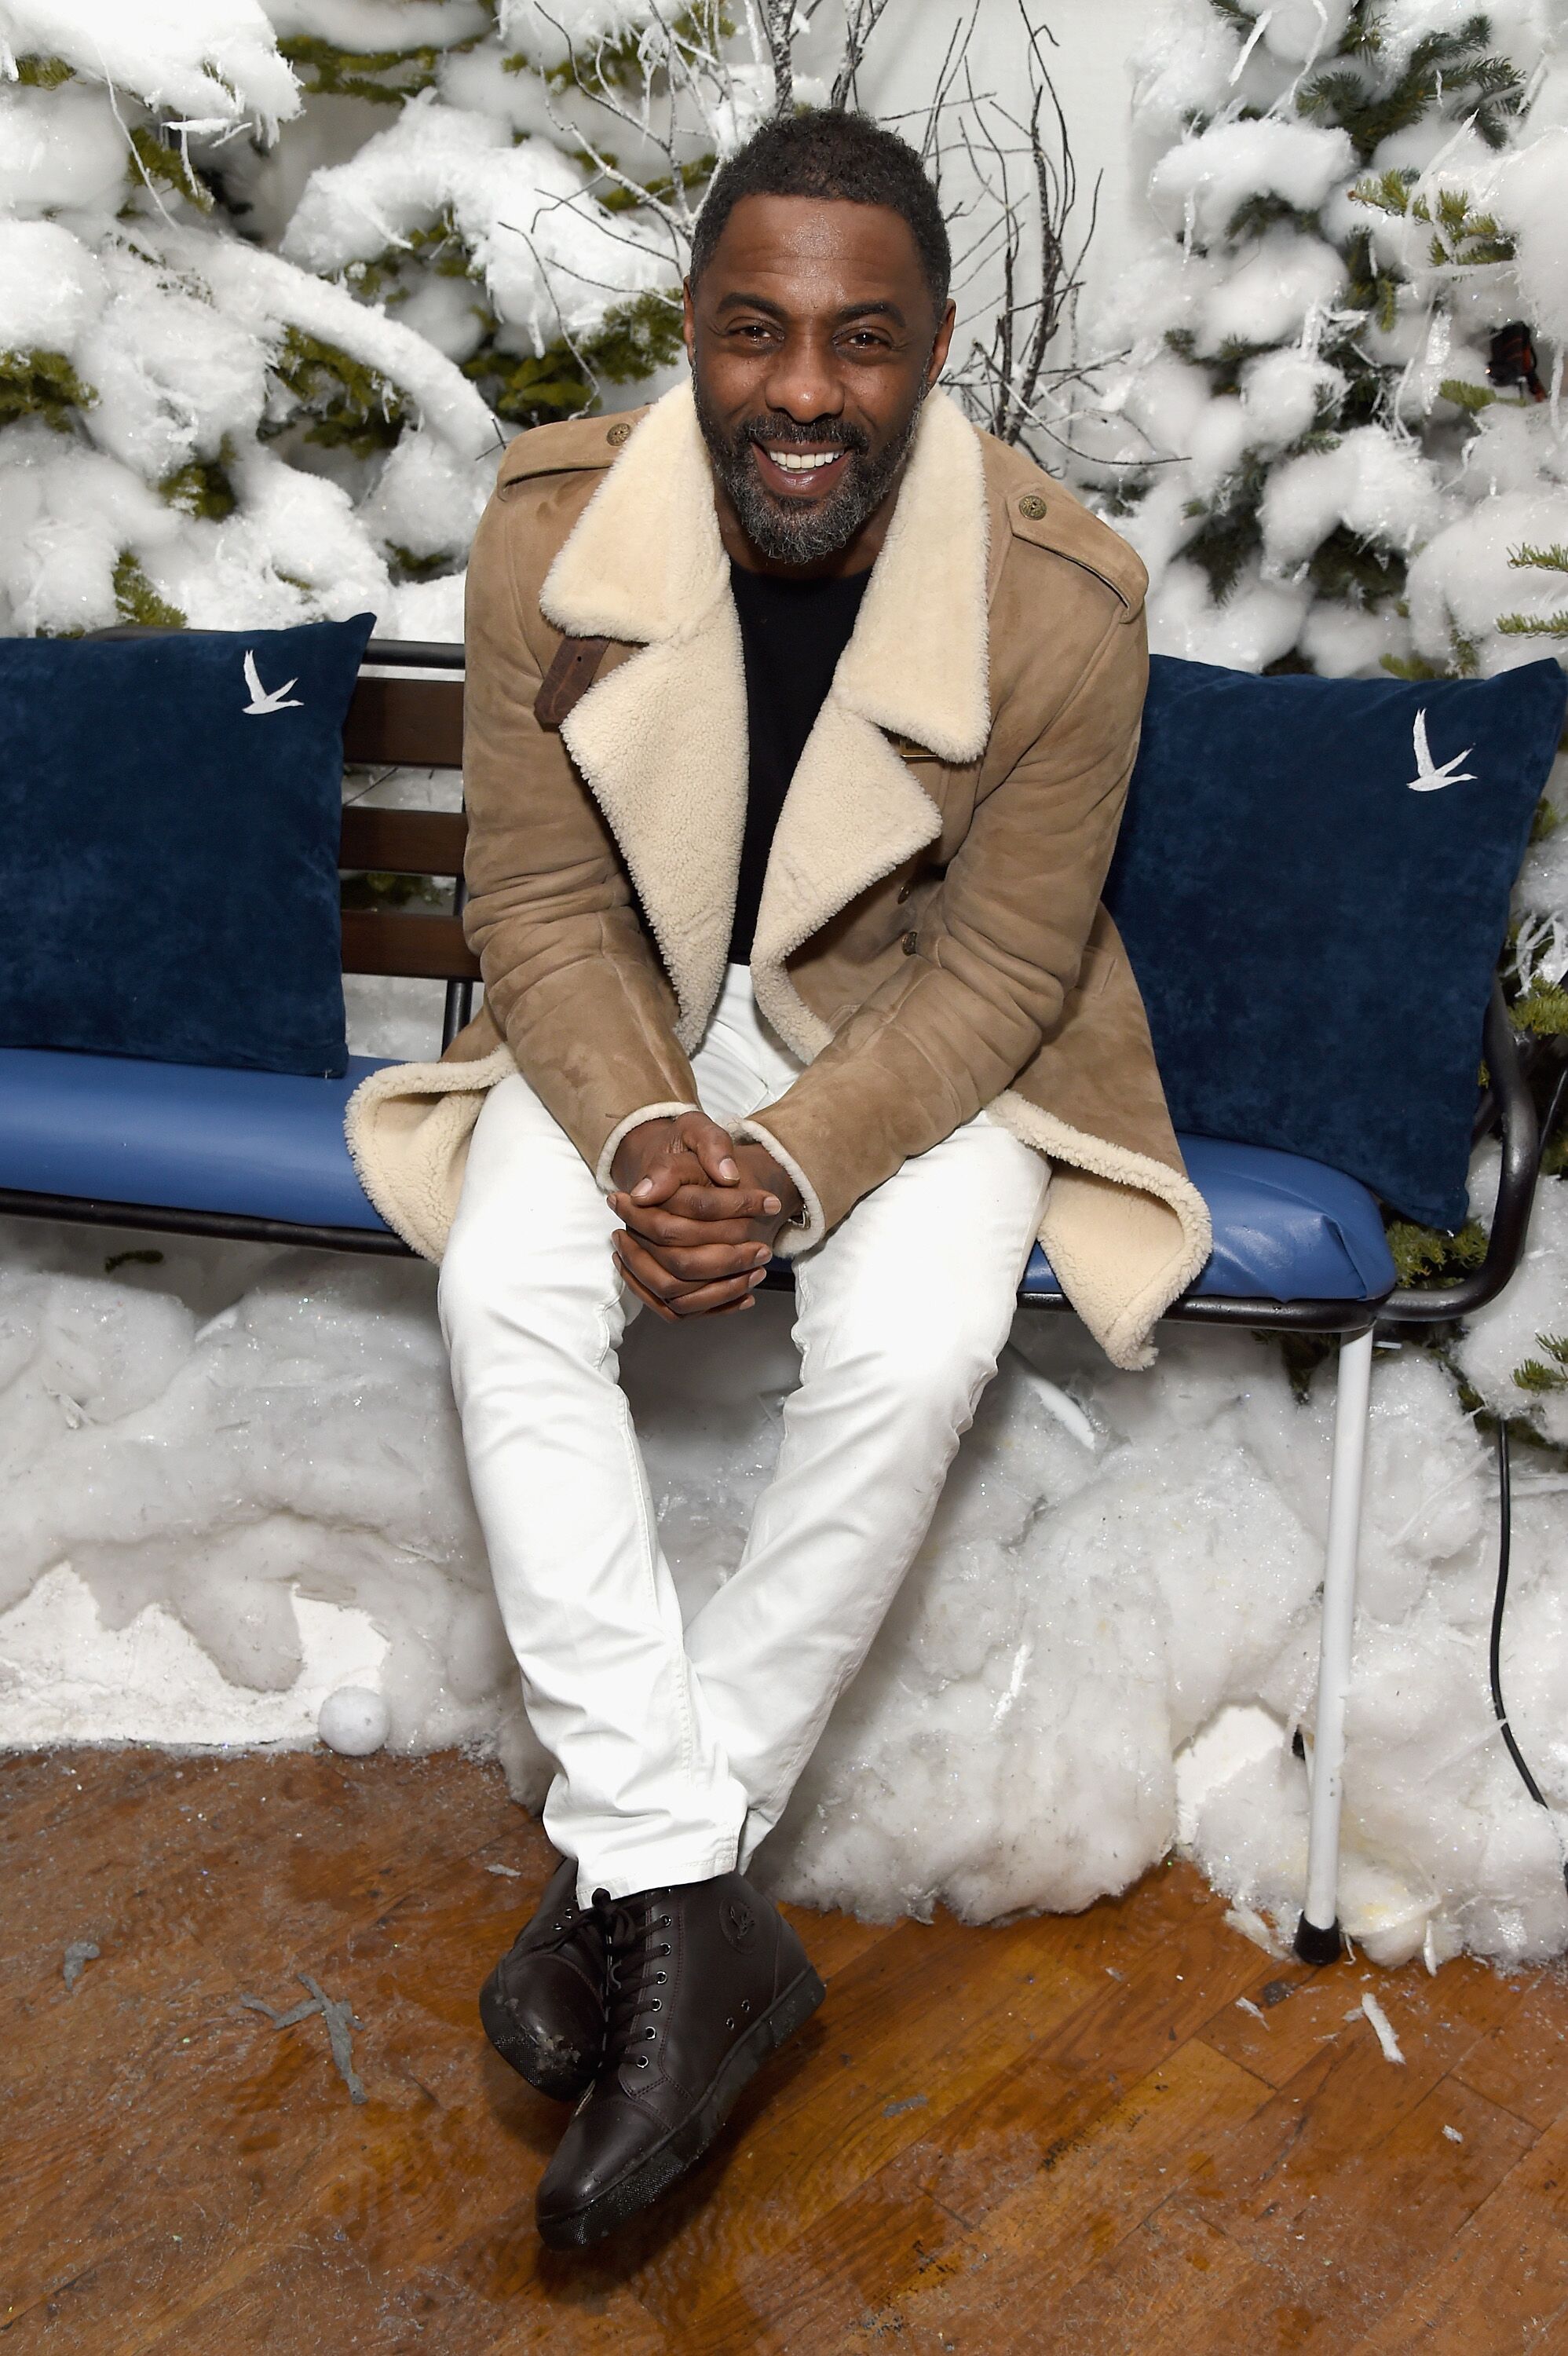  Idris Elba attends the "Yardie" After Party at Sundance Film Festival 2018 at The Grey Goose Blue Door on January 20, 2018 | Photo: Getty Images